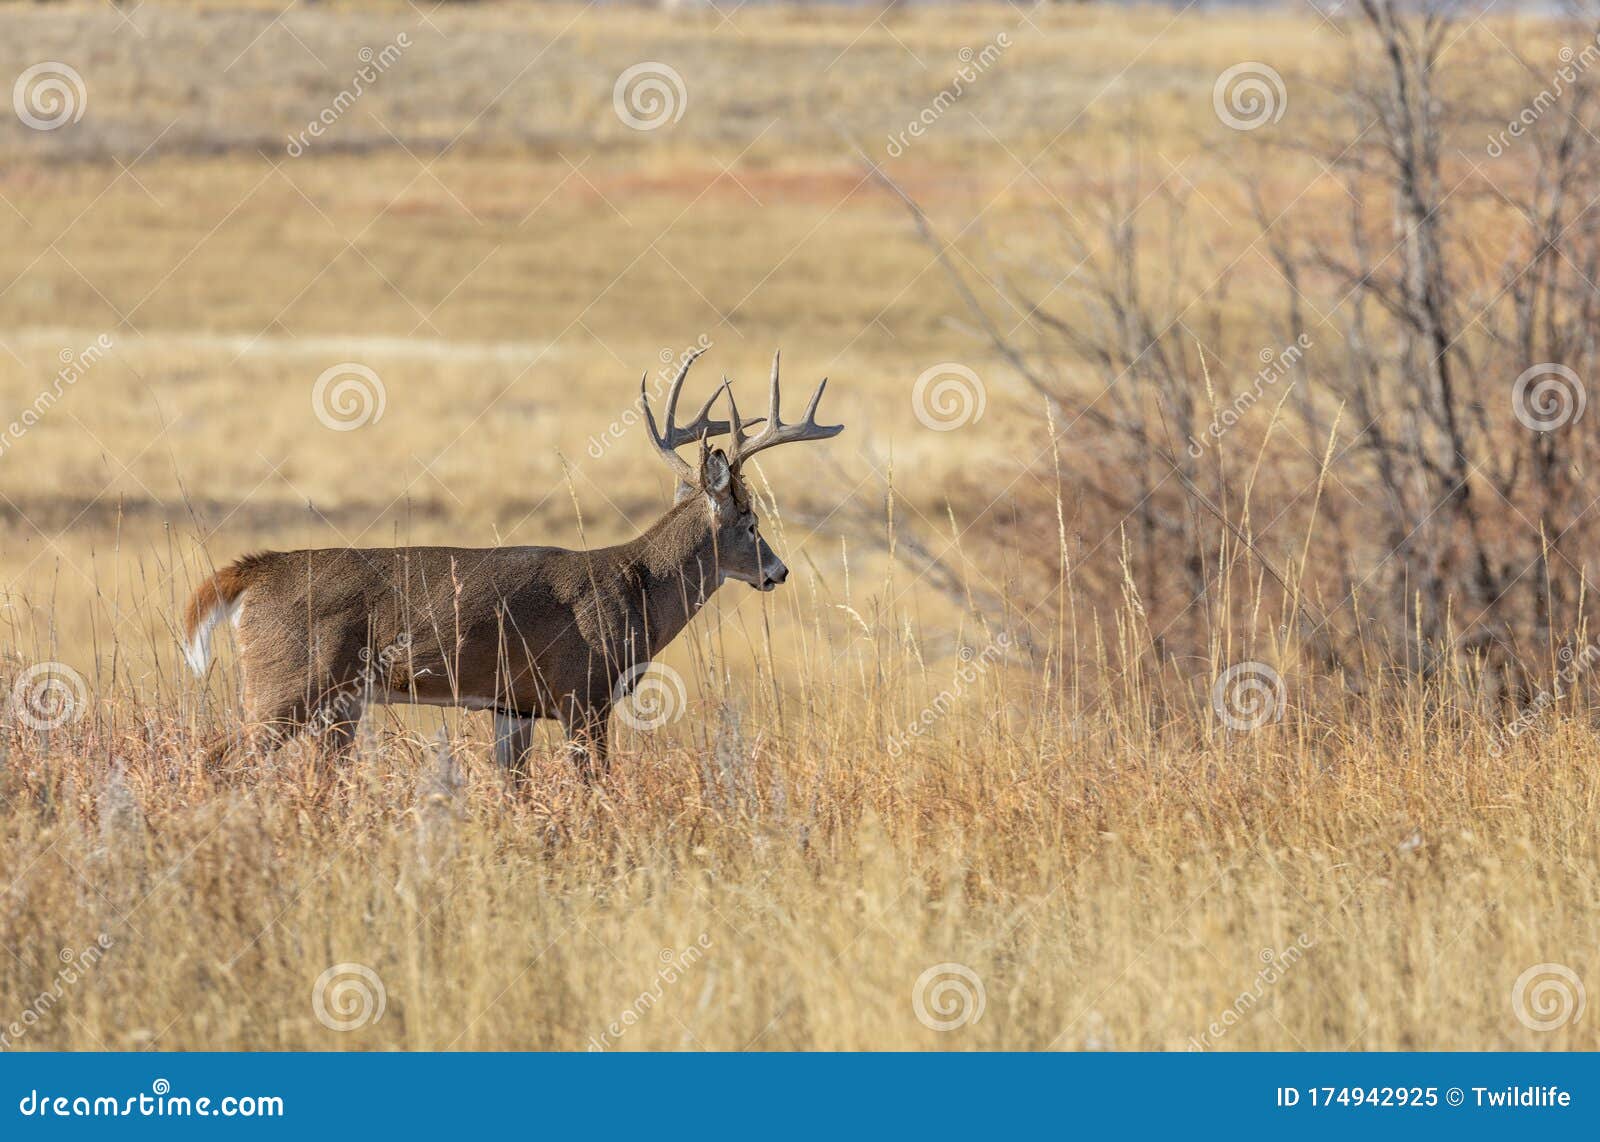 Whitetail Deer Buck in Colorado Stock Image - Image of wild, autumn ...